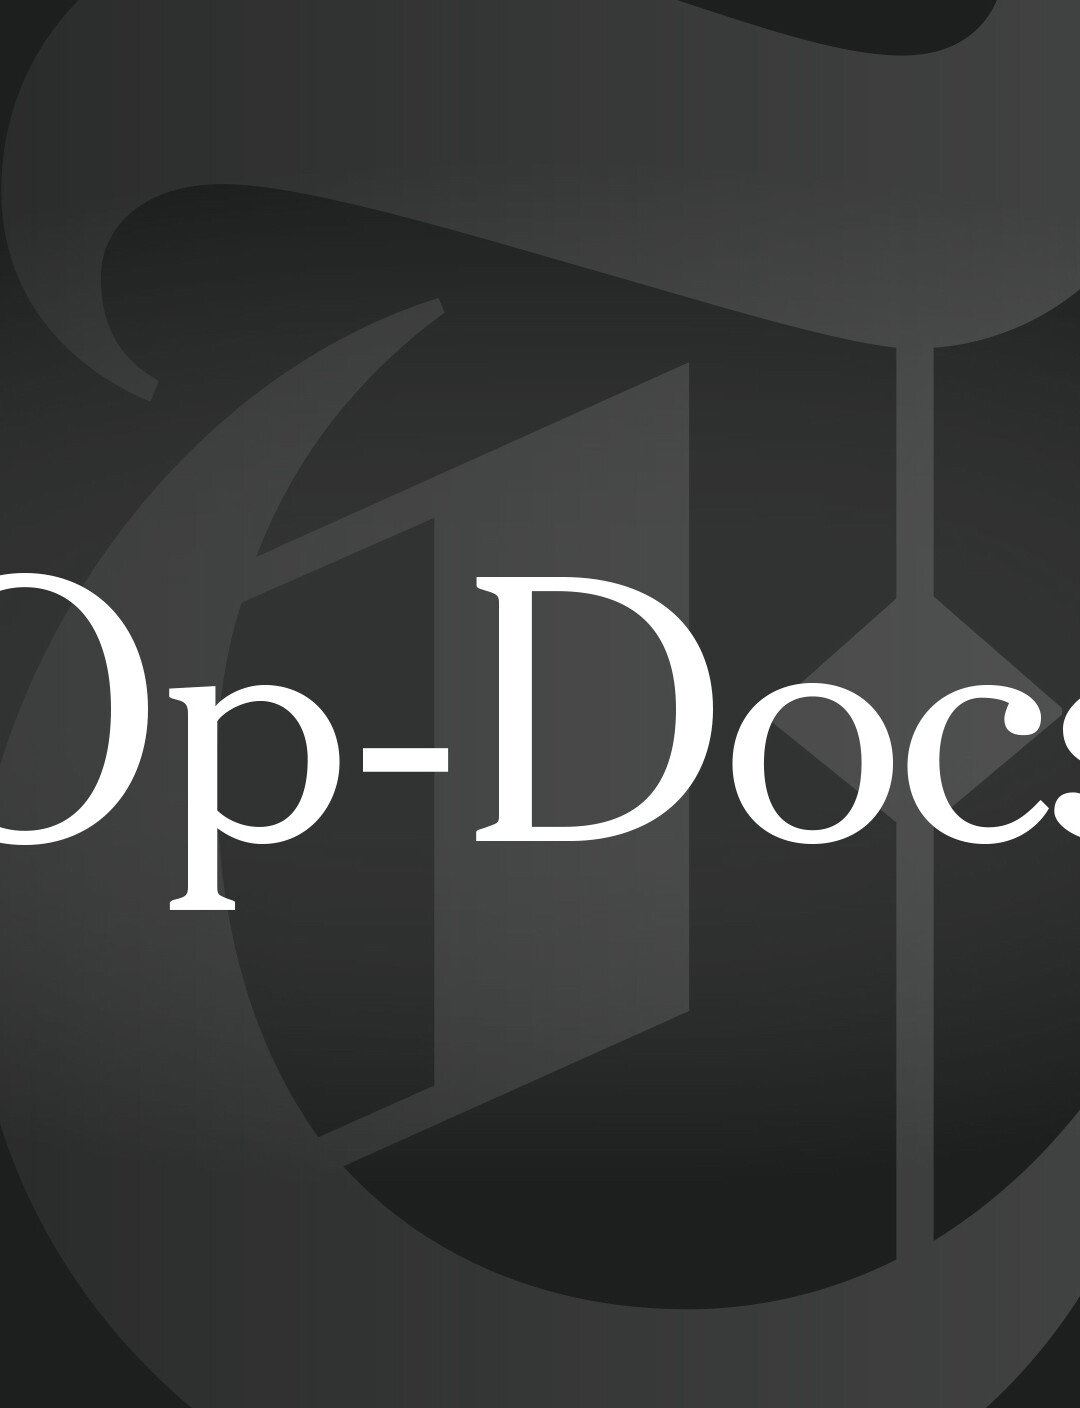 The New York Times Op-Docs